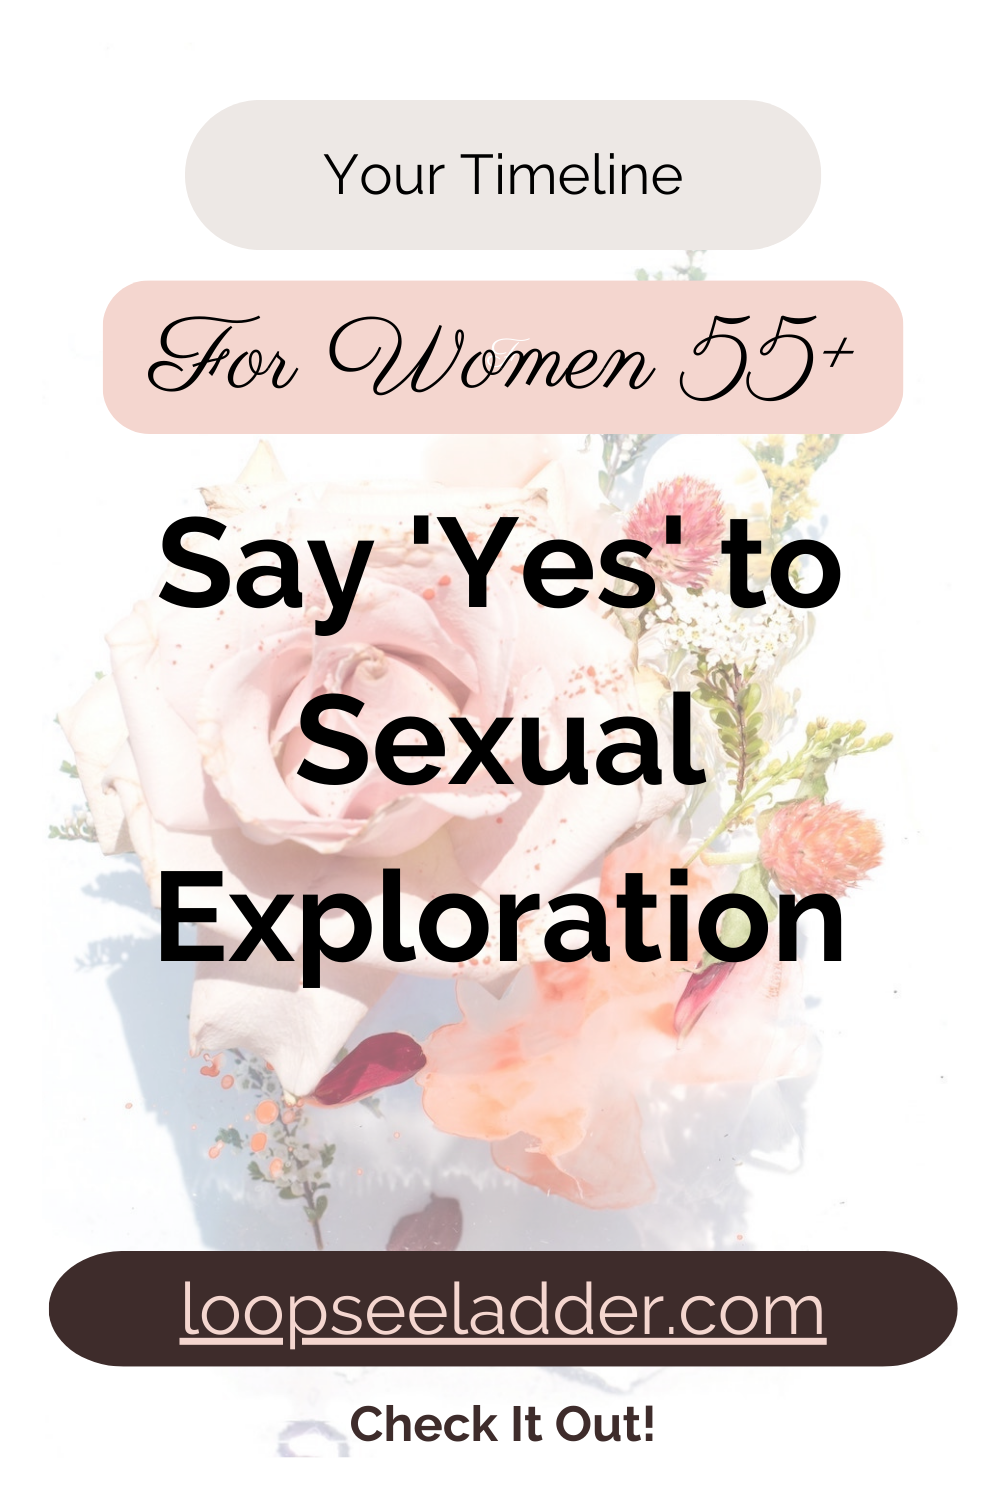 Why Women Over 55 Are Saying Yes to Sexual Exploration